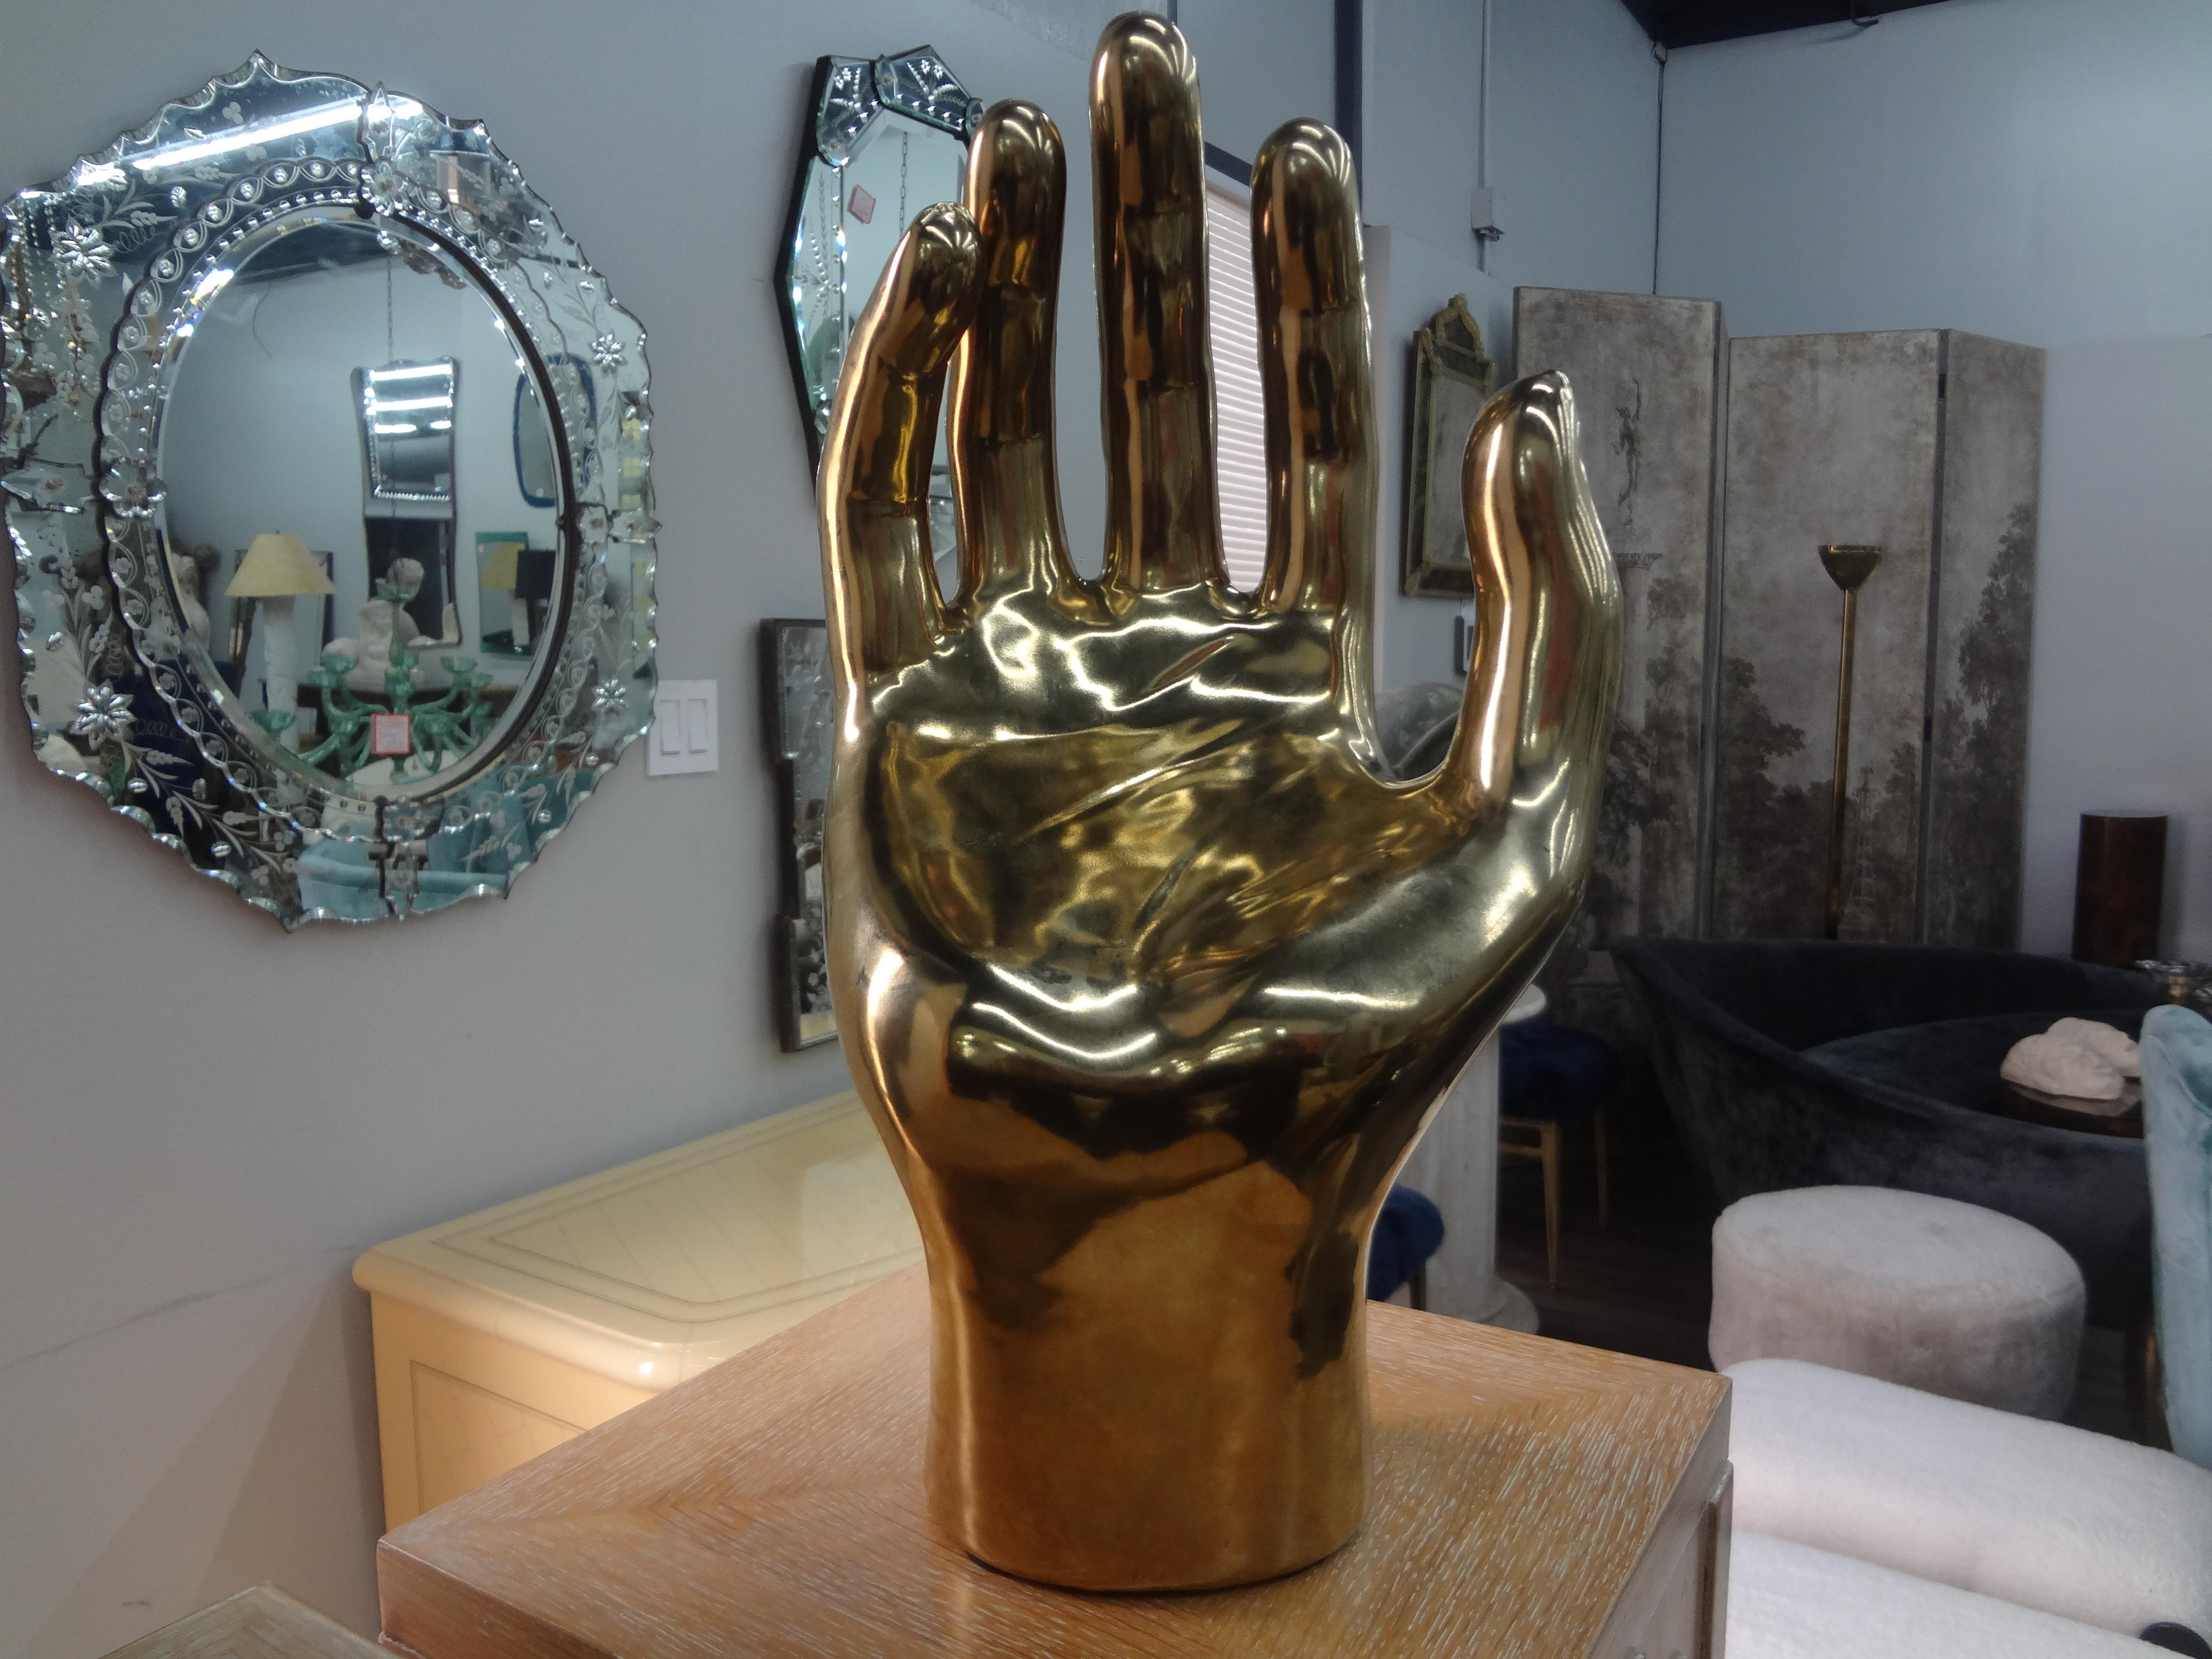 Large Vintage glazed gilt ceramic hand sculpture.
This stunning 20th century glazed gilt ceramic sculpture of a large hand. 
Great coffee table or bookcase accessory!.